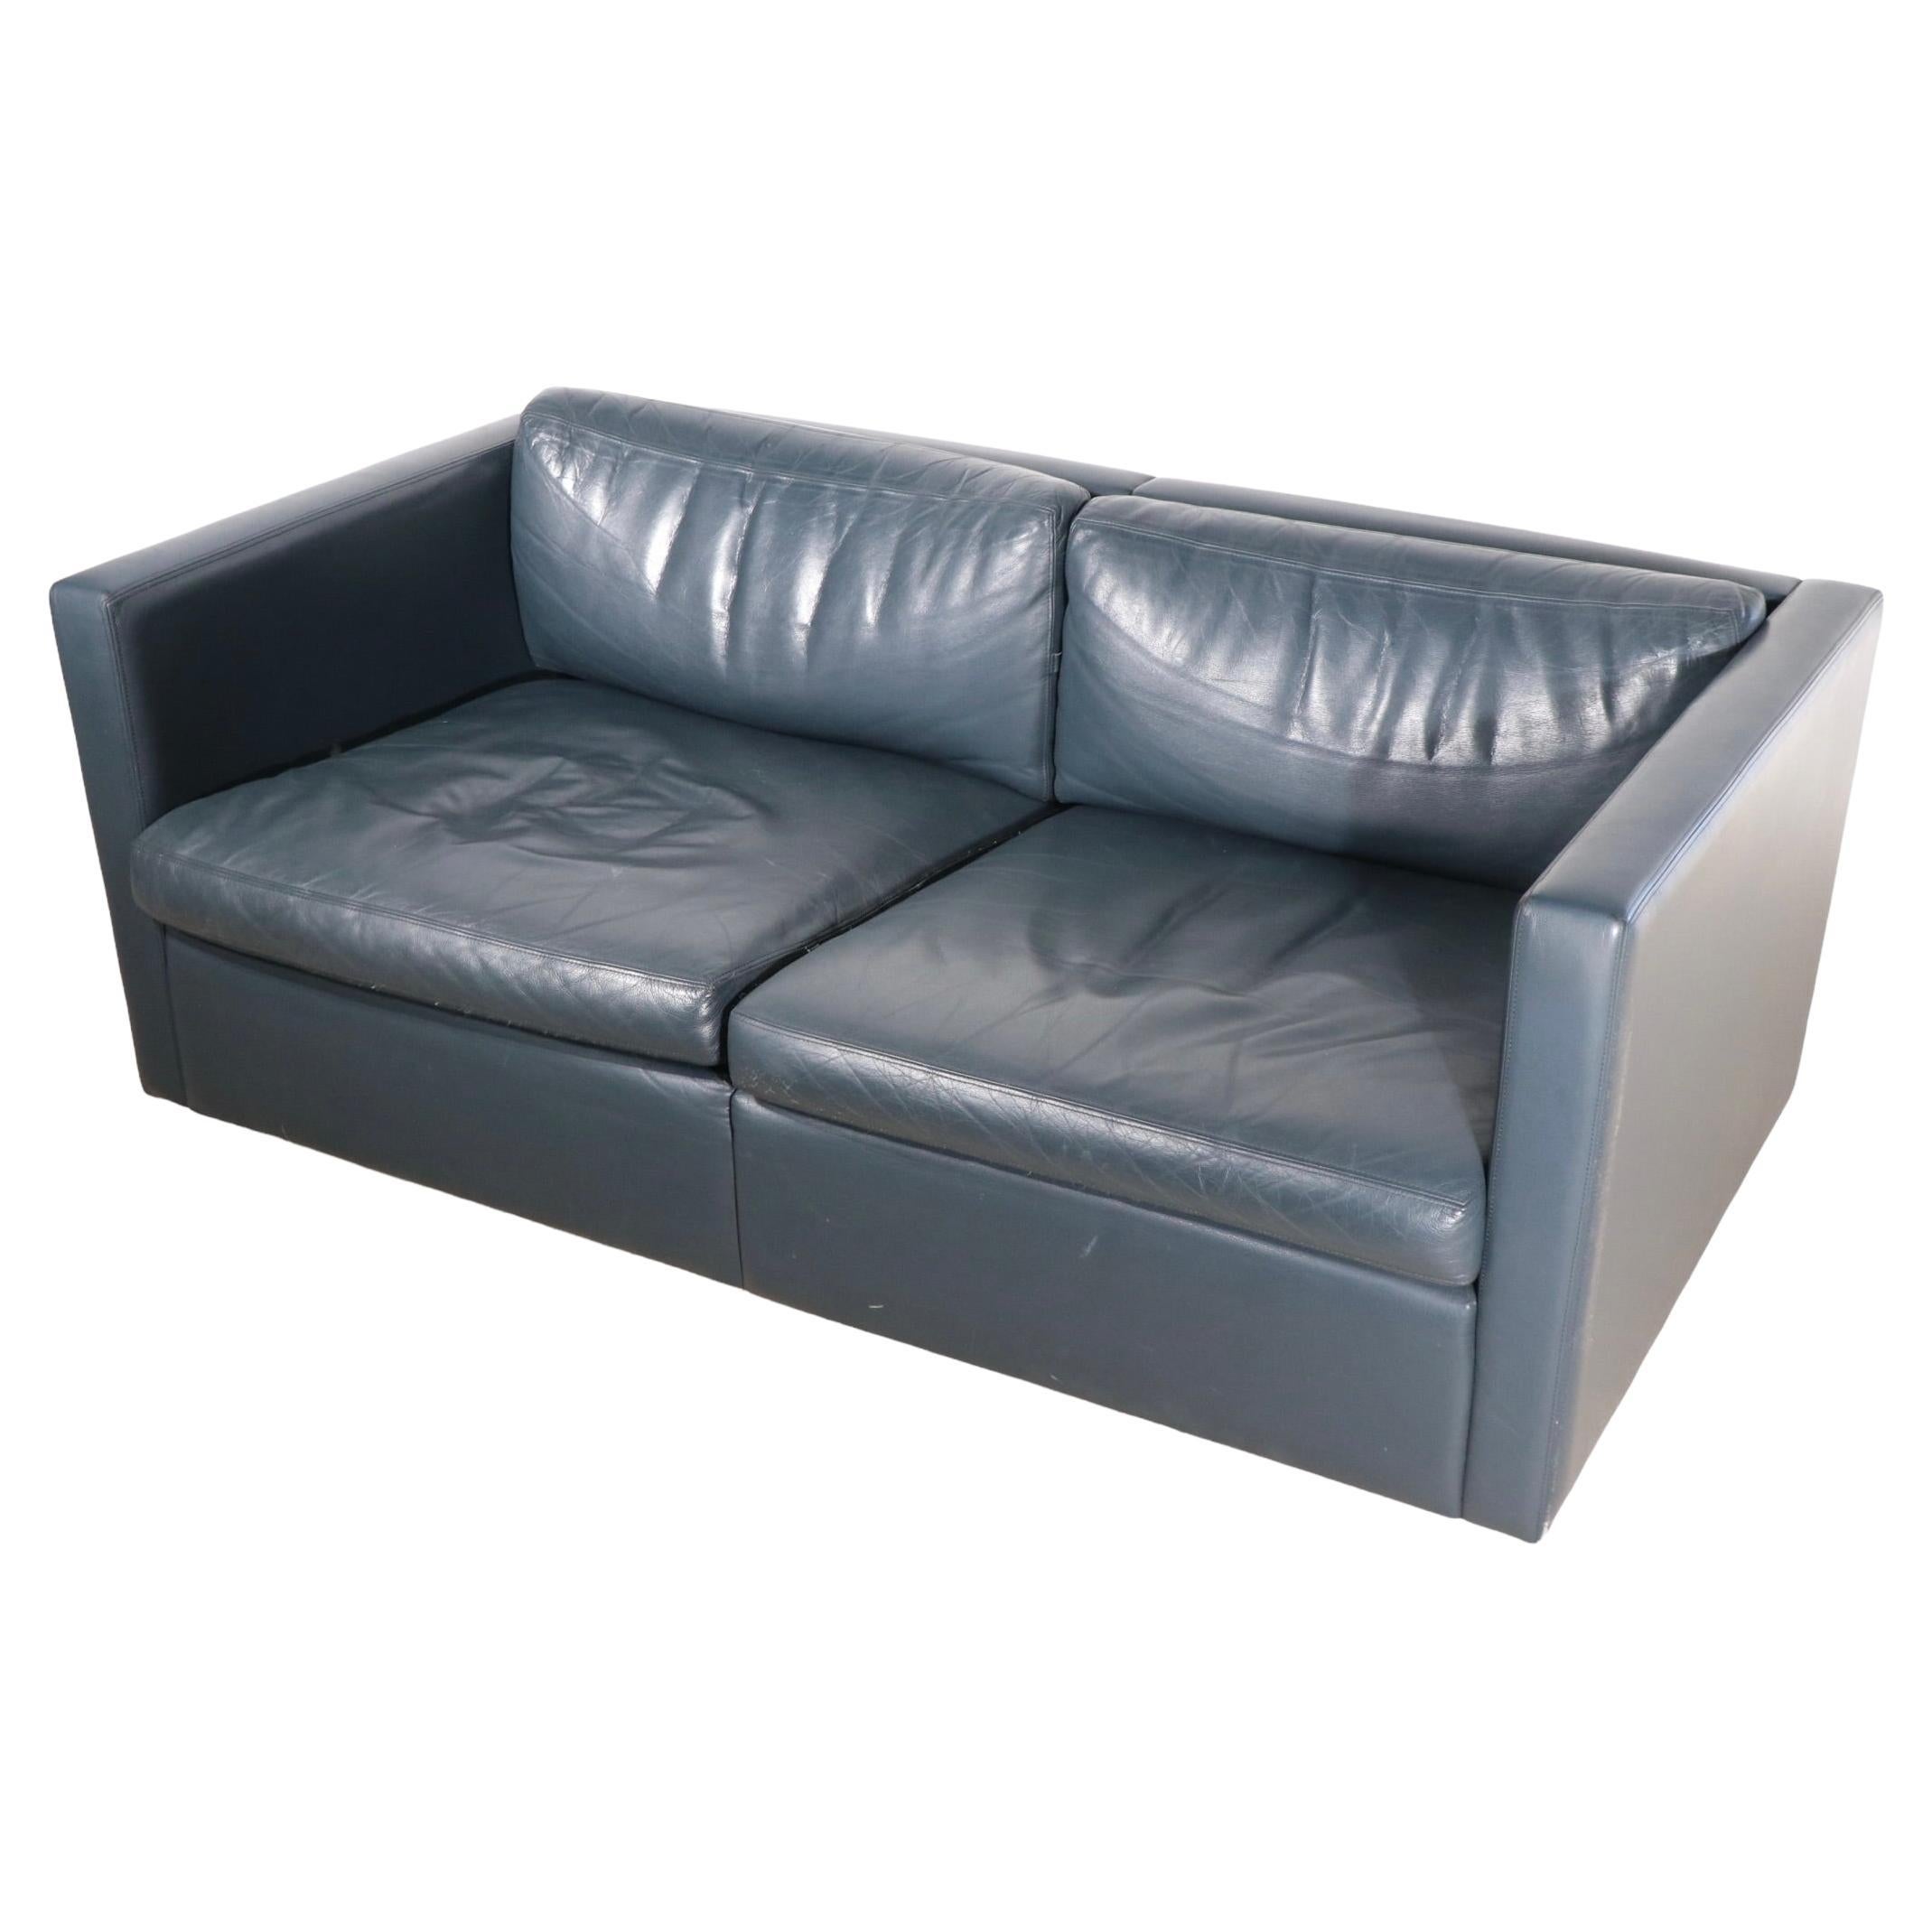 Leather Box Style Loveseat Sofa by Charles Pfister for Knoll For Sale